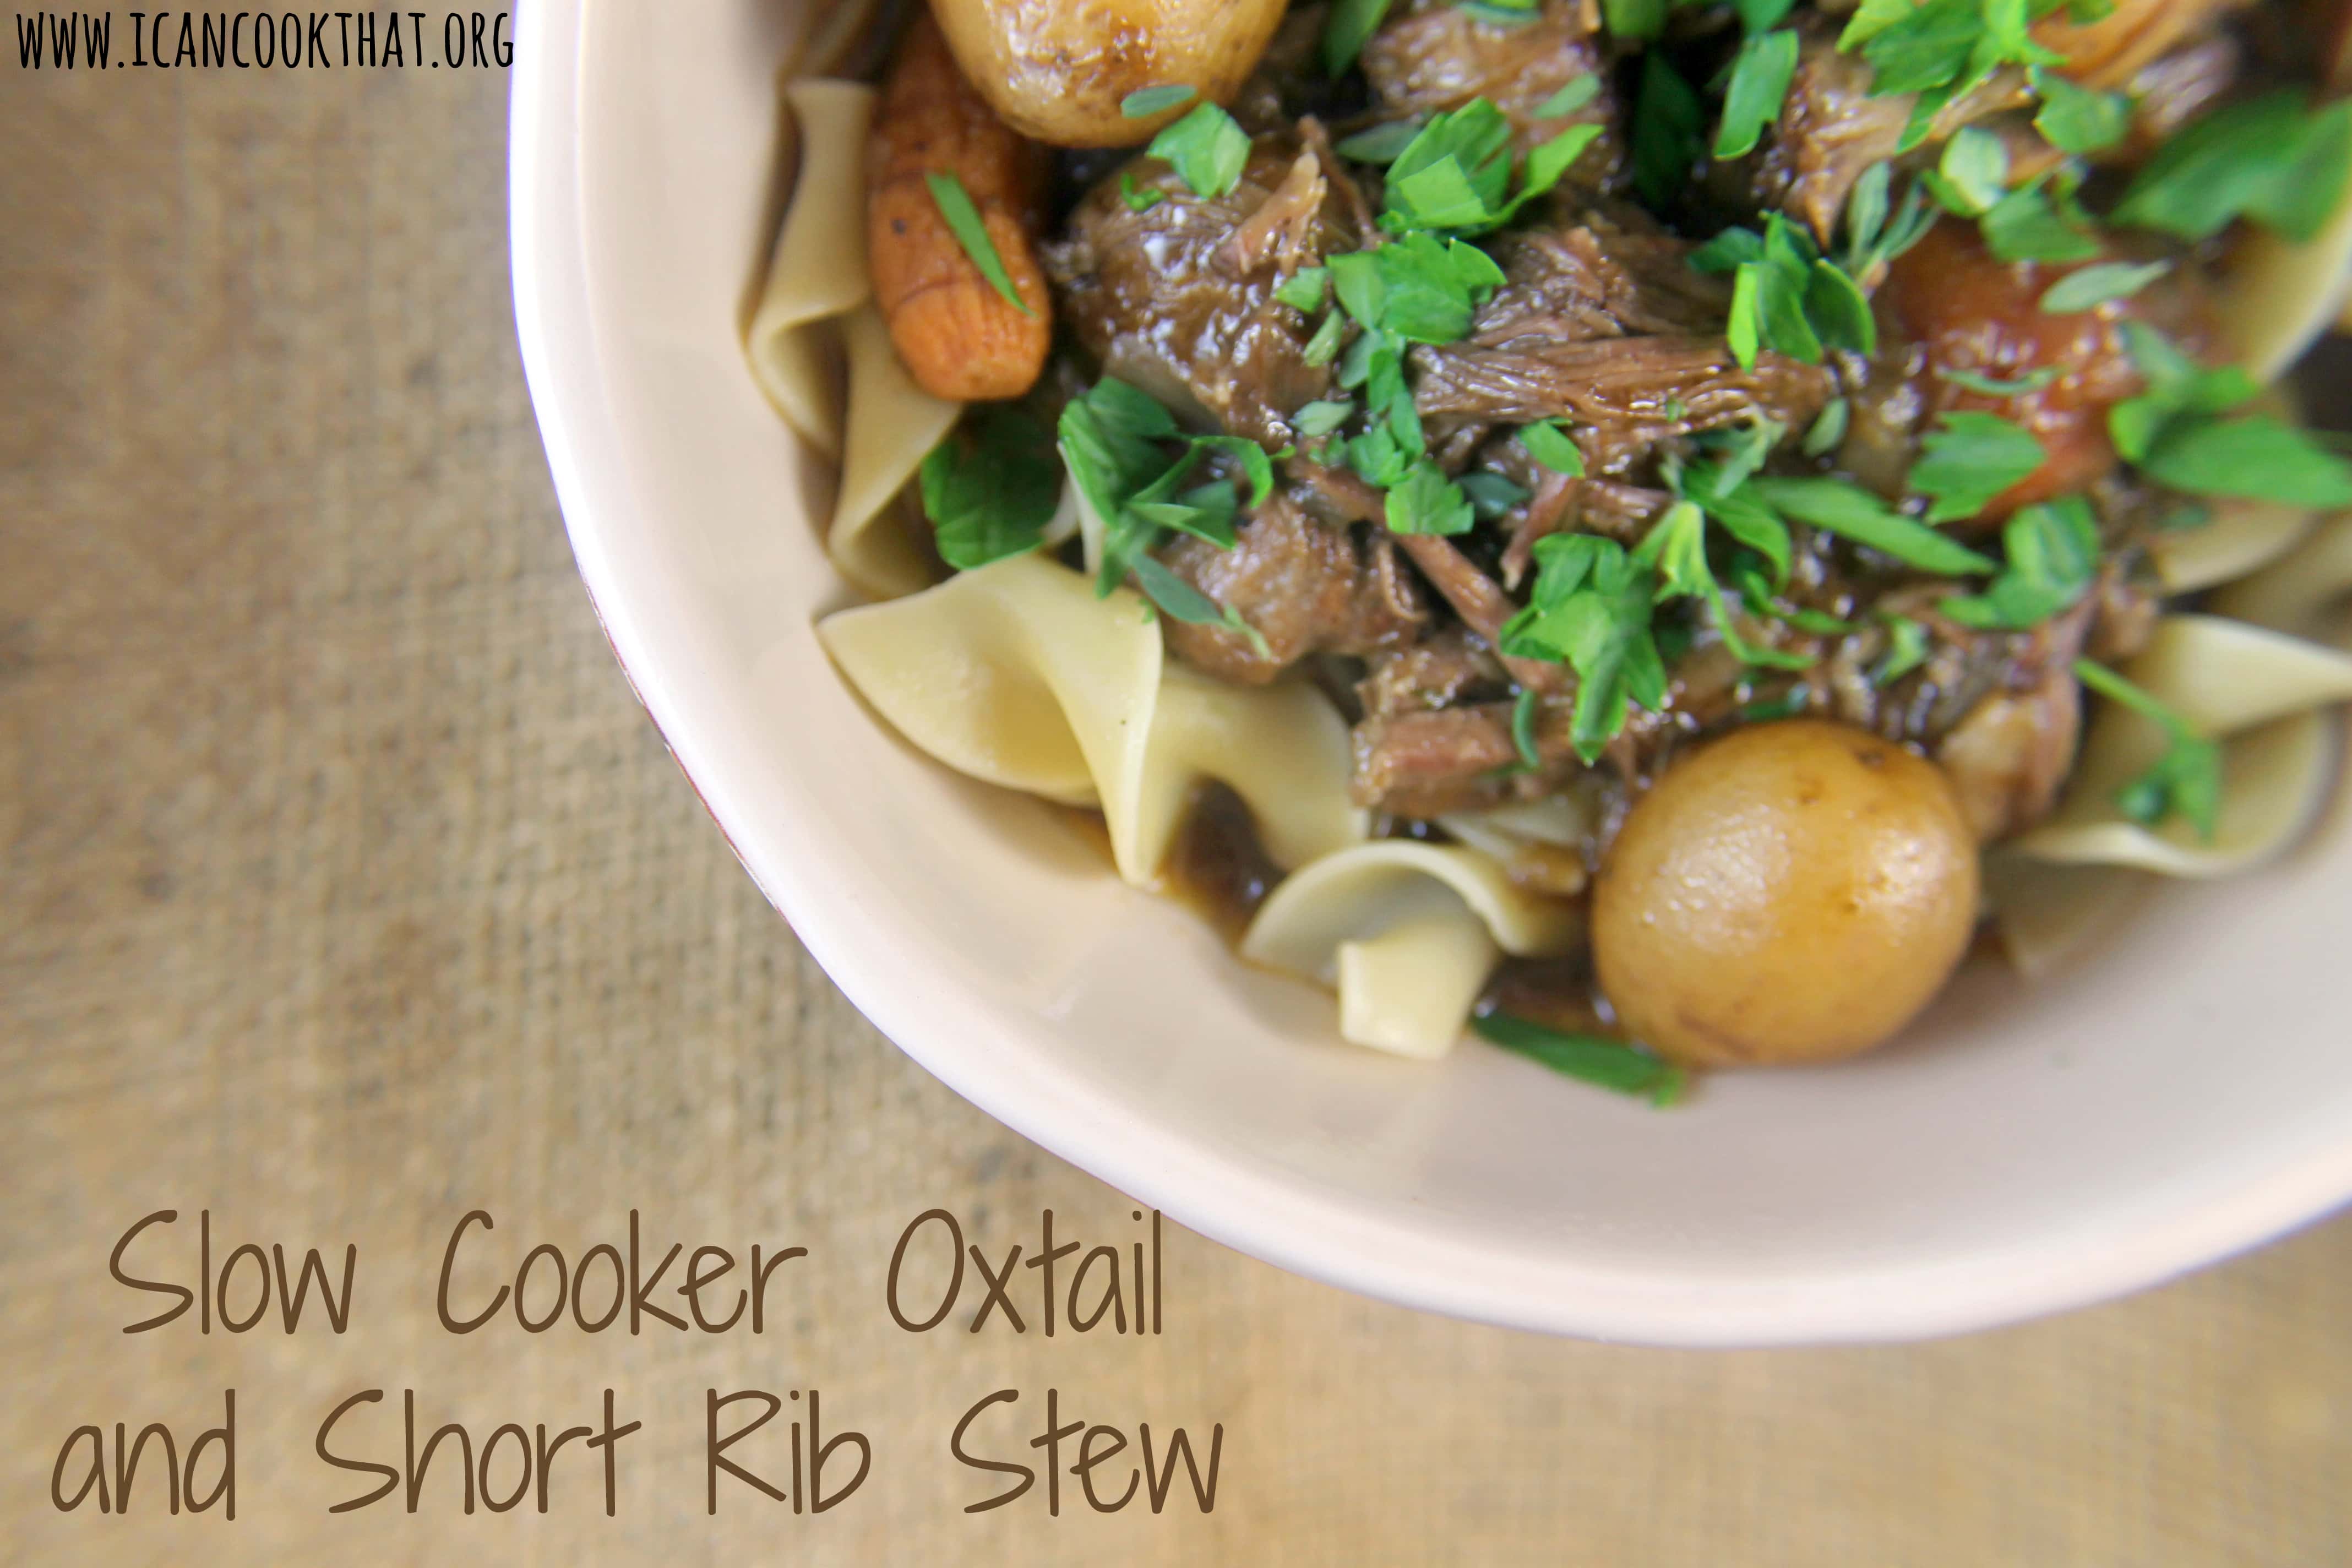 Slow Cooker Oxtail and Short Rib Stew